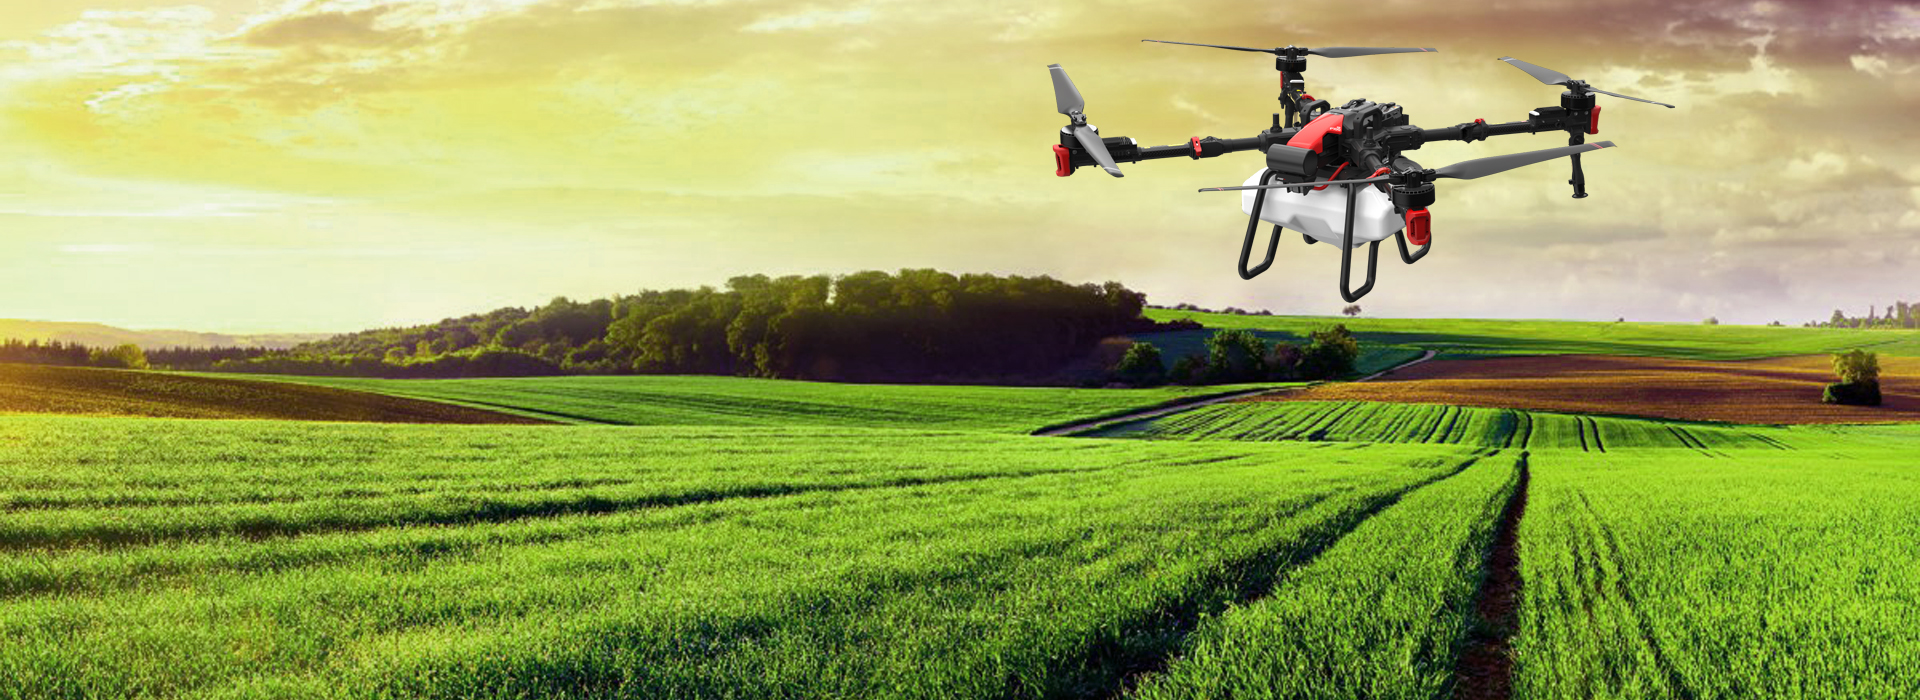 Agronomic field processing by drones